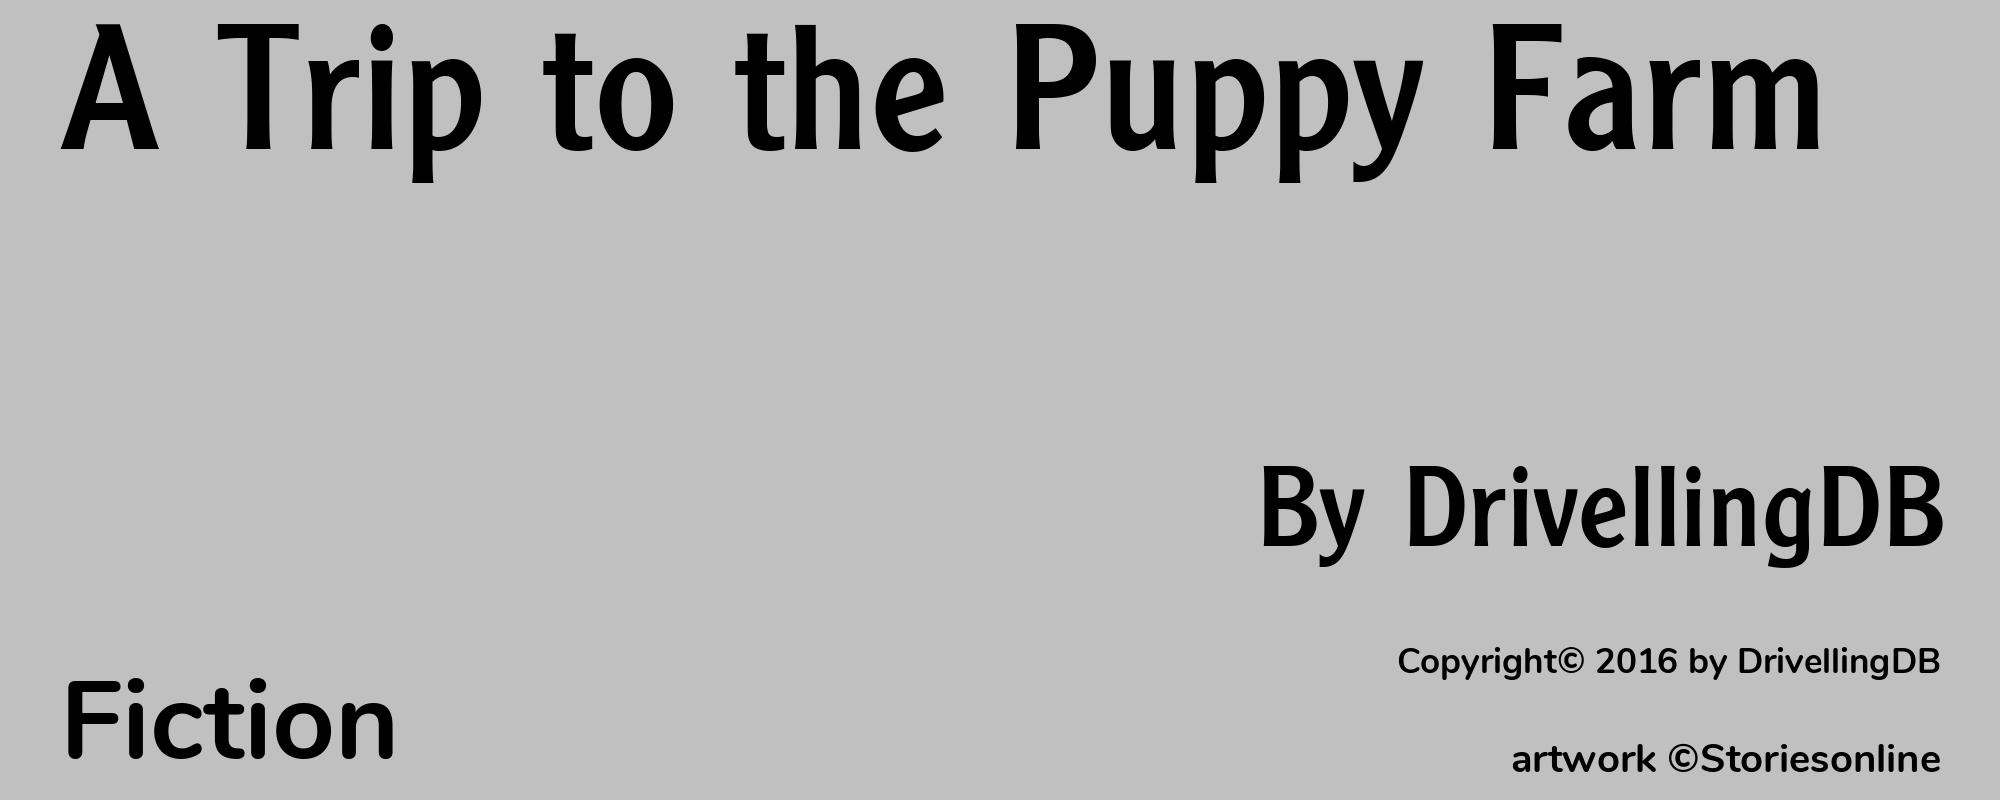 A Trip to the Puppy Farm - Cover